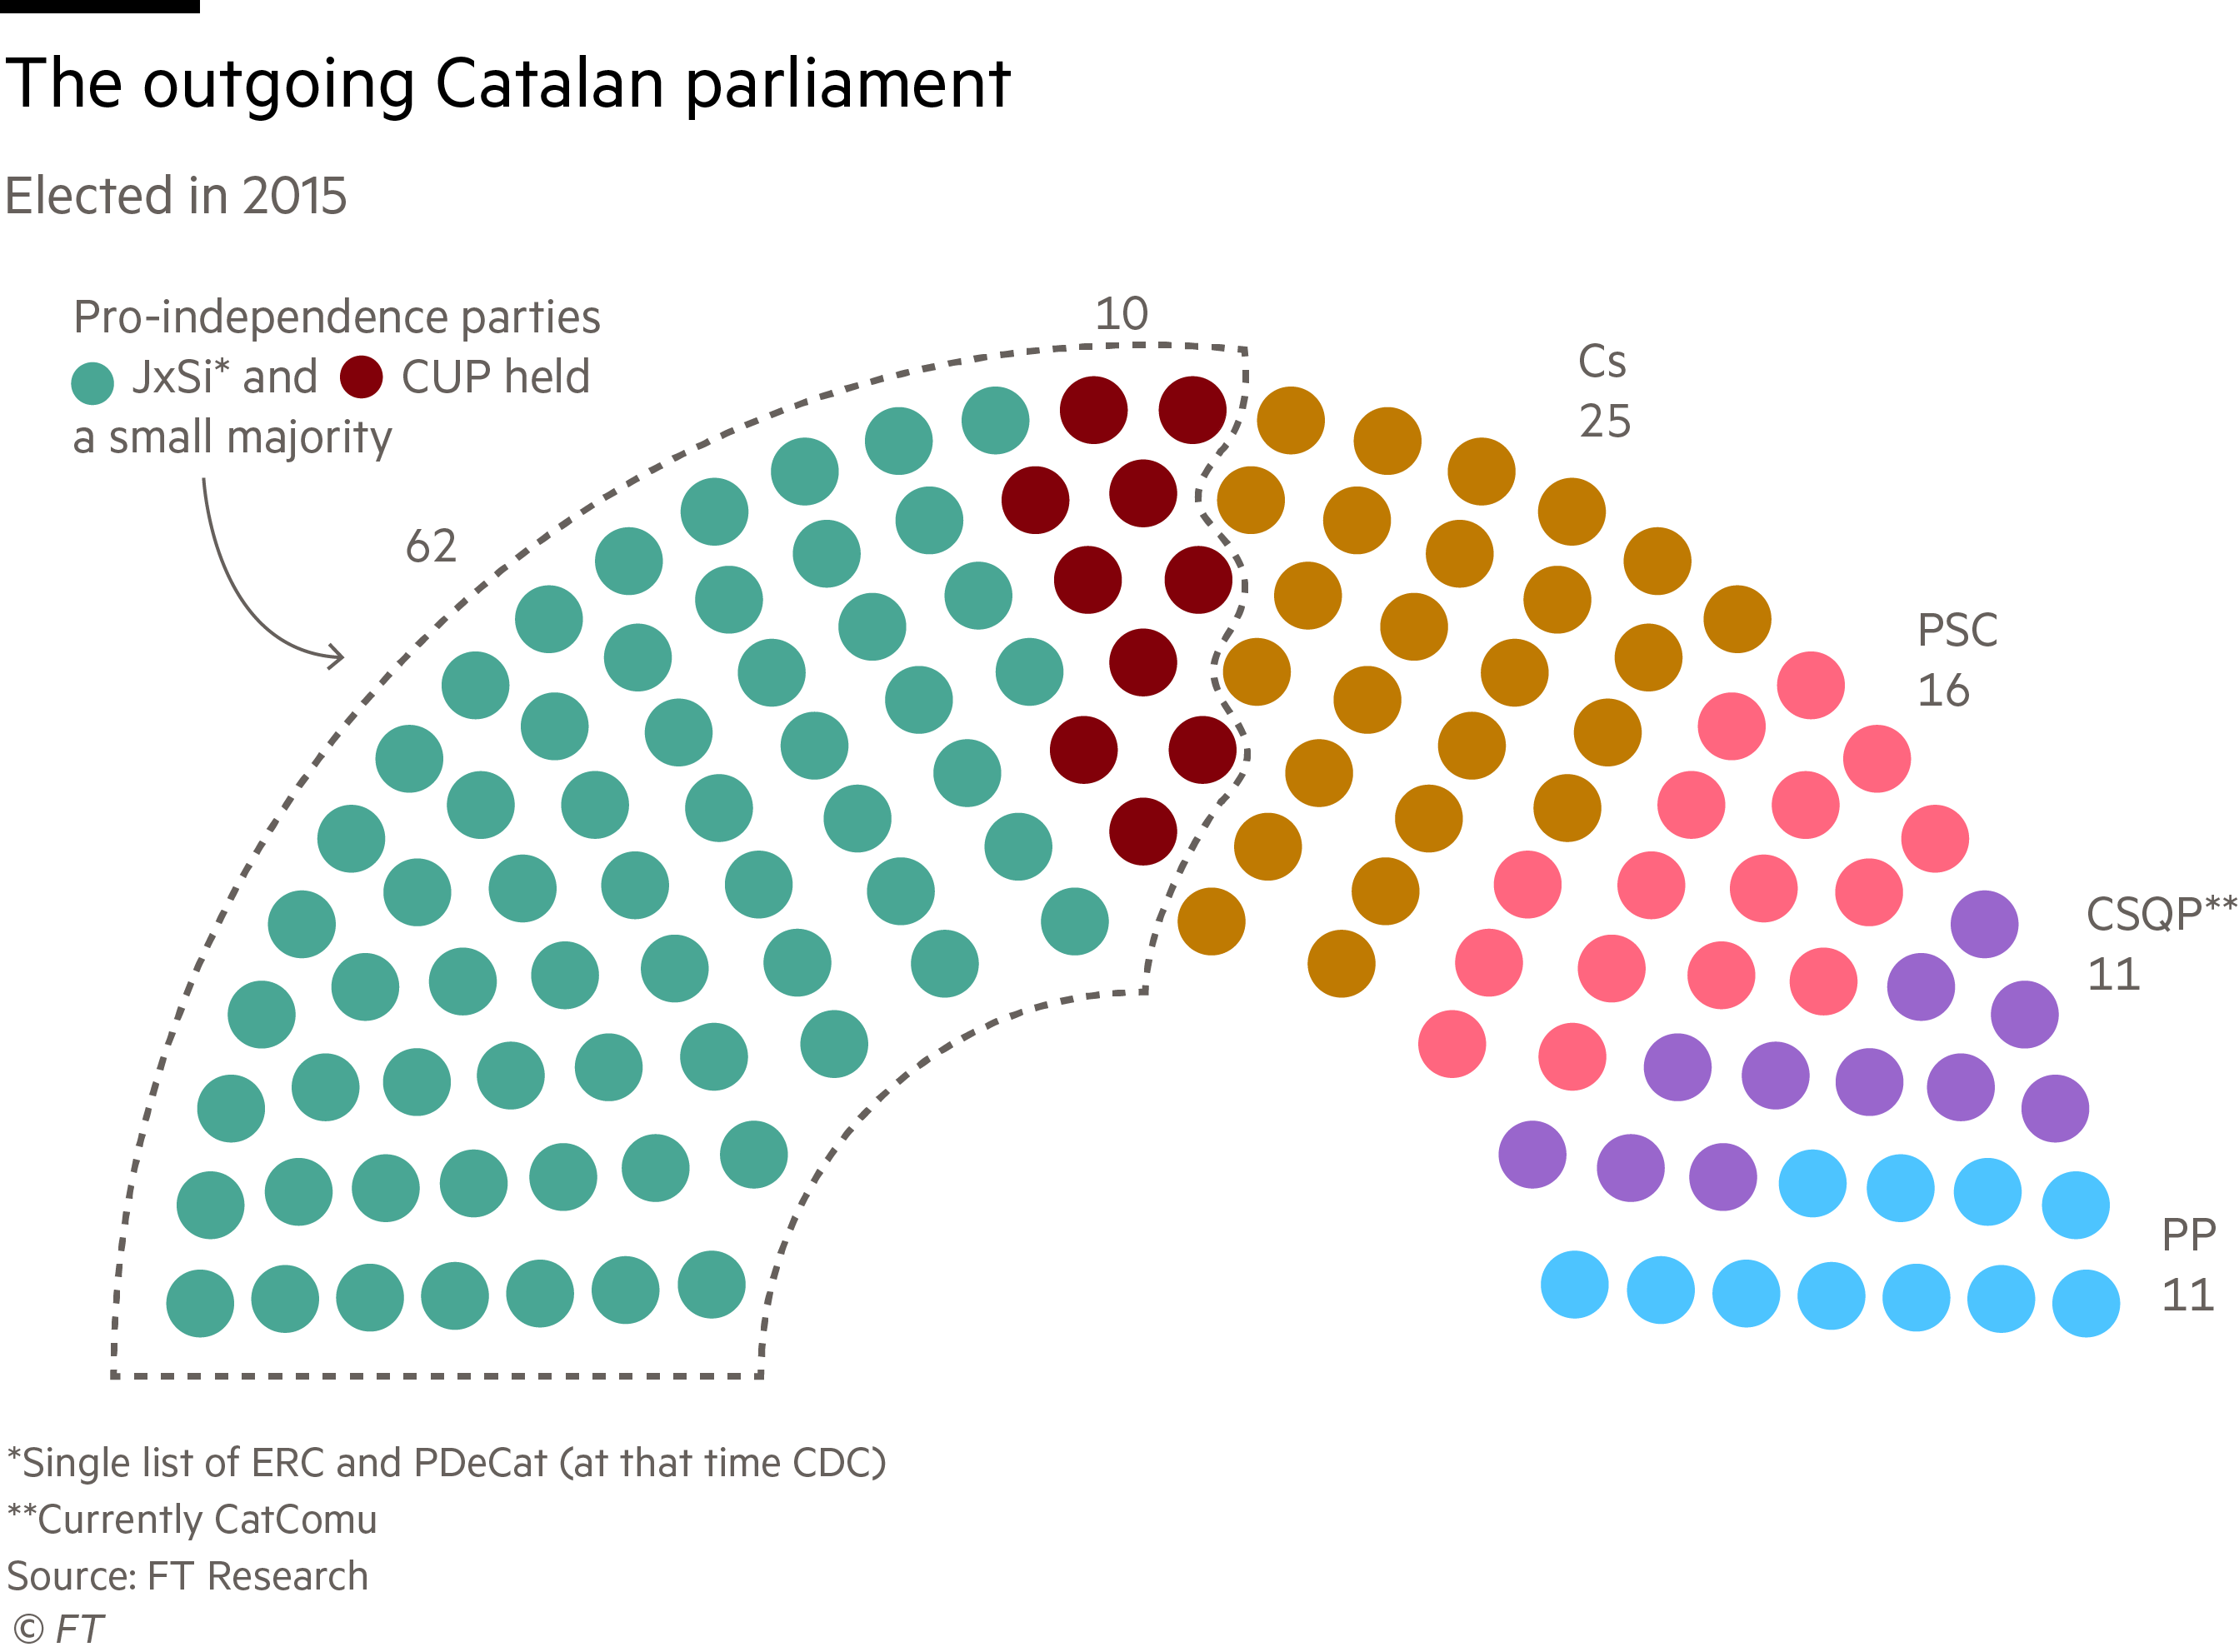 Catalan elections: the composition of the outgoing parliament